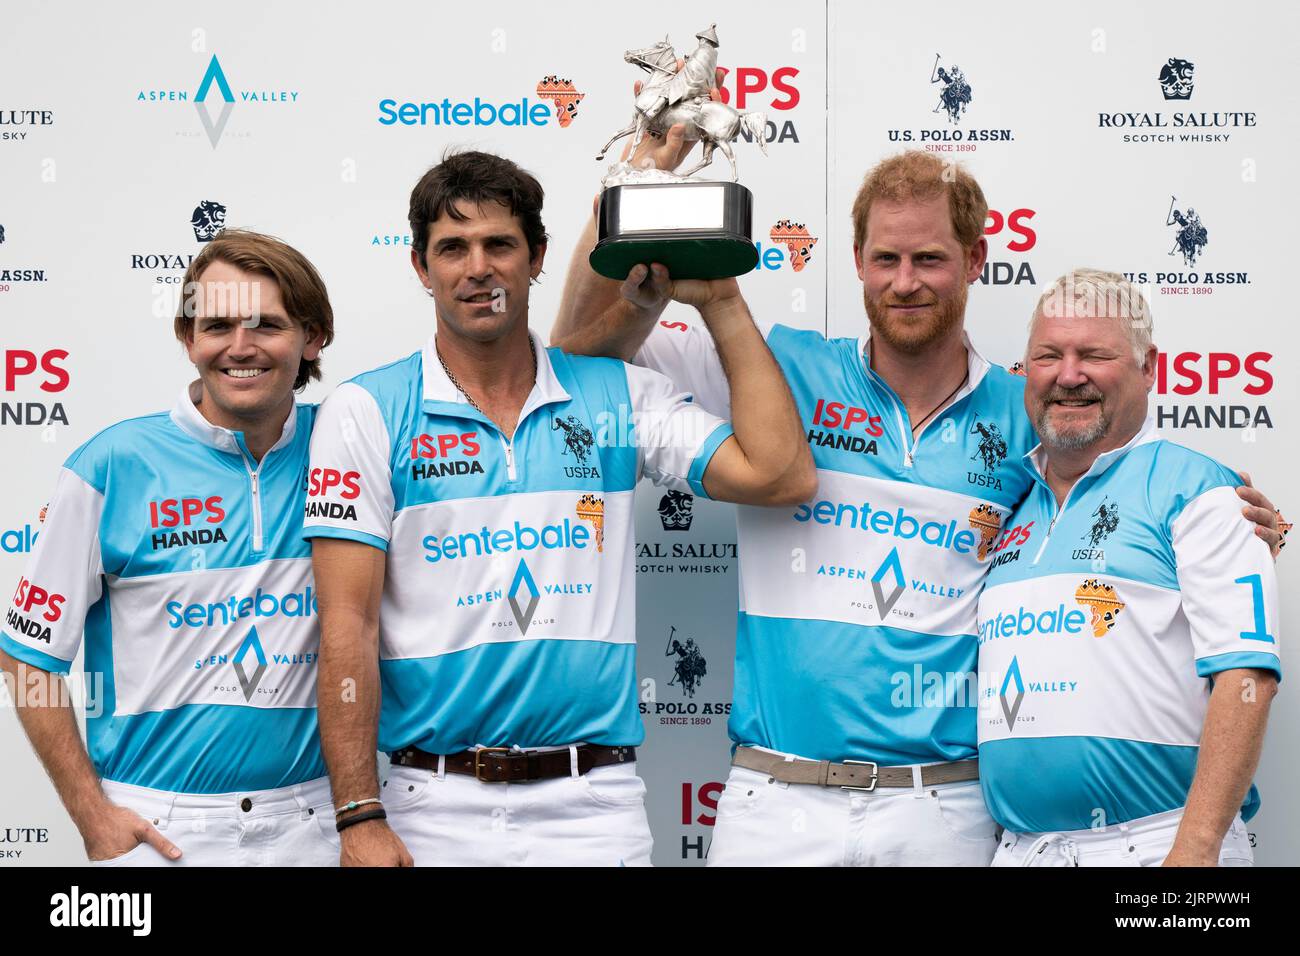 (left to right) Grant Ganzi, Nacho Figueras, the Duke of Sussex and Steve Cox raise the trophy after taking part in a polo match during the Sentebale ISPS Handa Polo Cup at the Aspen Valley Polo Club in Carbondale, Colorado in the United States. Picture date: Thursday August 25, 2022. Stock Photo